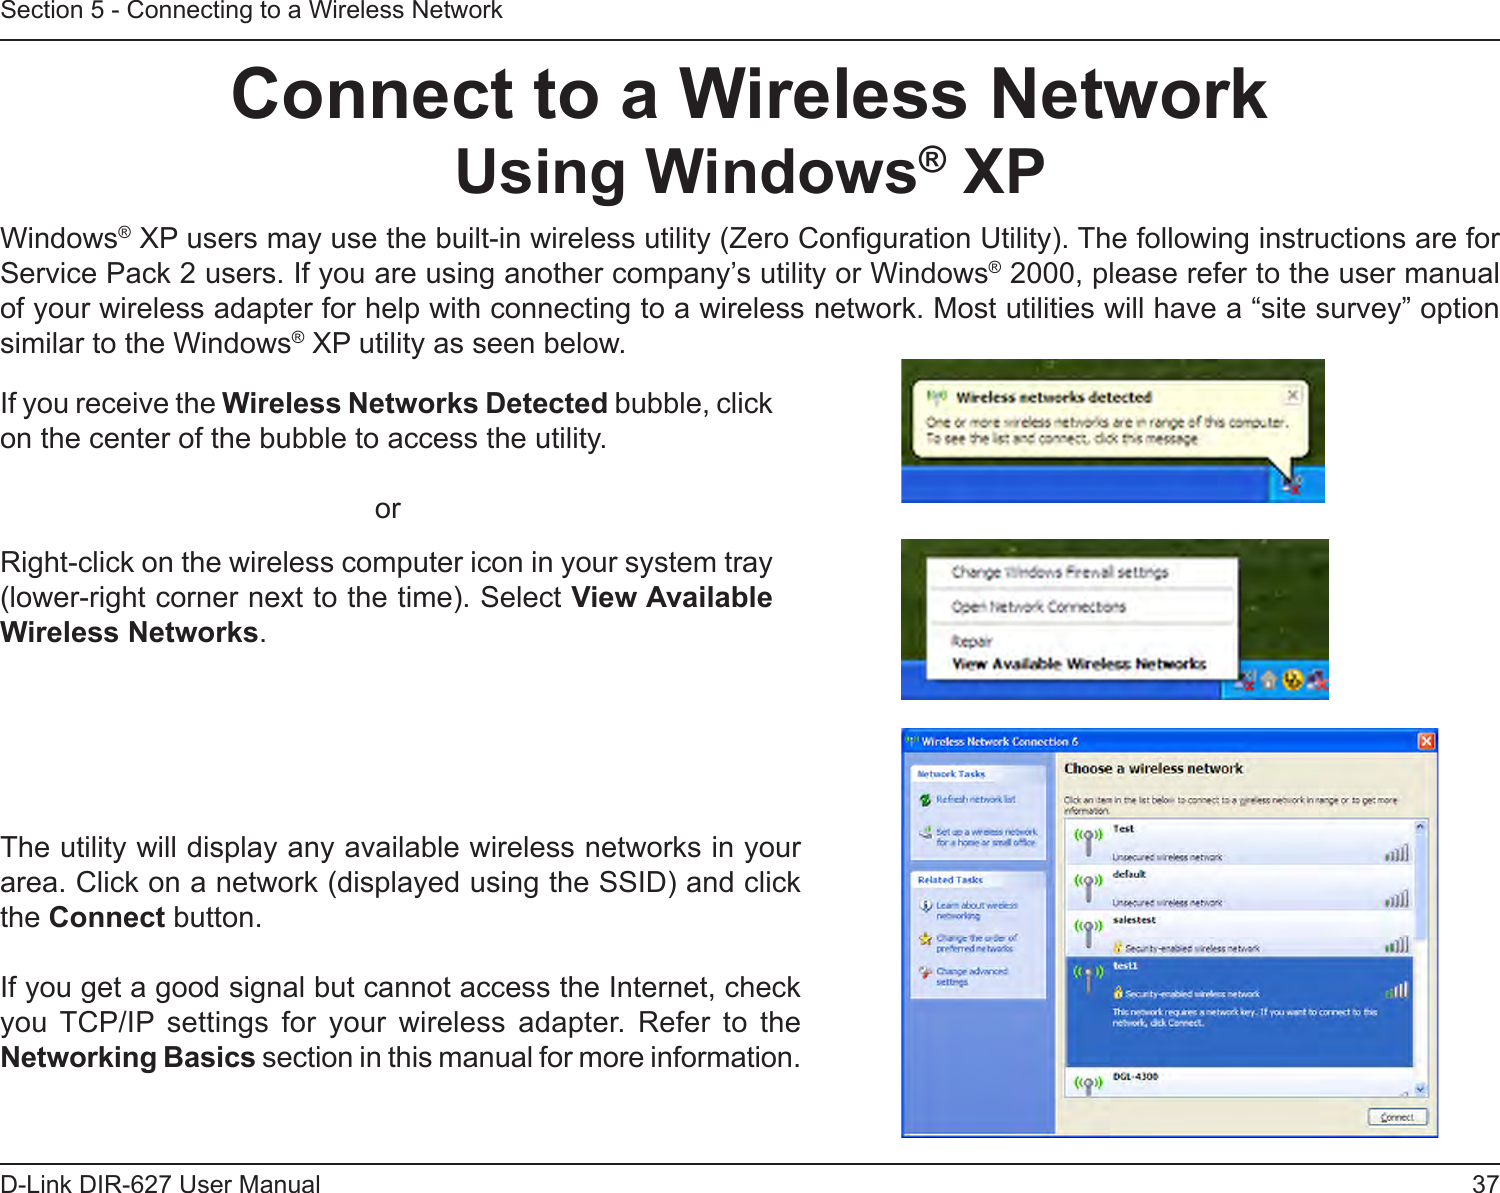 37D-Link DIR-627 User ManualSection 5 - Connecting to a Wireless NetworkConnecttoaWirelessNetworkUsingWindows®XPWindows® XP users may use the built-in wireless utility (Zero Conguration Utility). The following instructions are for Service Pack 2 users. If you are using another company’s utility or Windows® 2000, please refer to the user manual of your wireless adapter for help with connecting to a wireless network. Most utilities will have a “site survey” option similar to the Windows® XP utility as seen below.Right-click on the wireless computer icon in your system tray (lower-right corner next to the time). Select ViewAvailableWirelessNetworks.If you receive the WirelessNetworksDetected bubble, click on the center of the bubble to access the utility.     orThe utility will display any available wireless networks in your area. Click on a network (displayed using the SSID) and click the Connect button.If you get a good signal but cannot access the Internet, check you  TCP/IP  settings  for  your  wireless  adapter.  Refer  to  the NetworkingBasics section in this manual for more information.